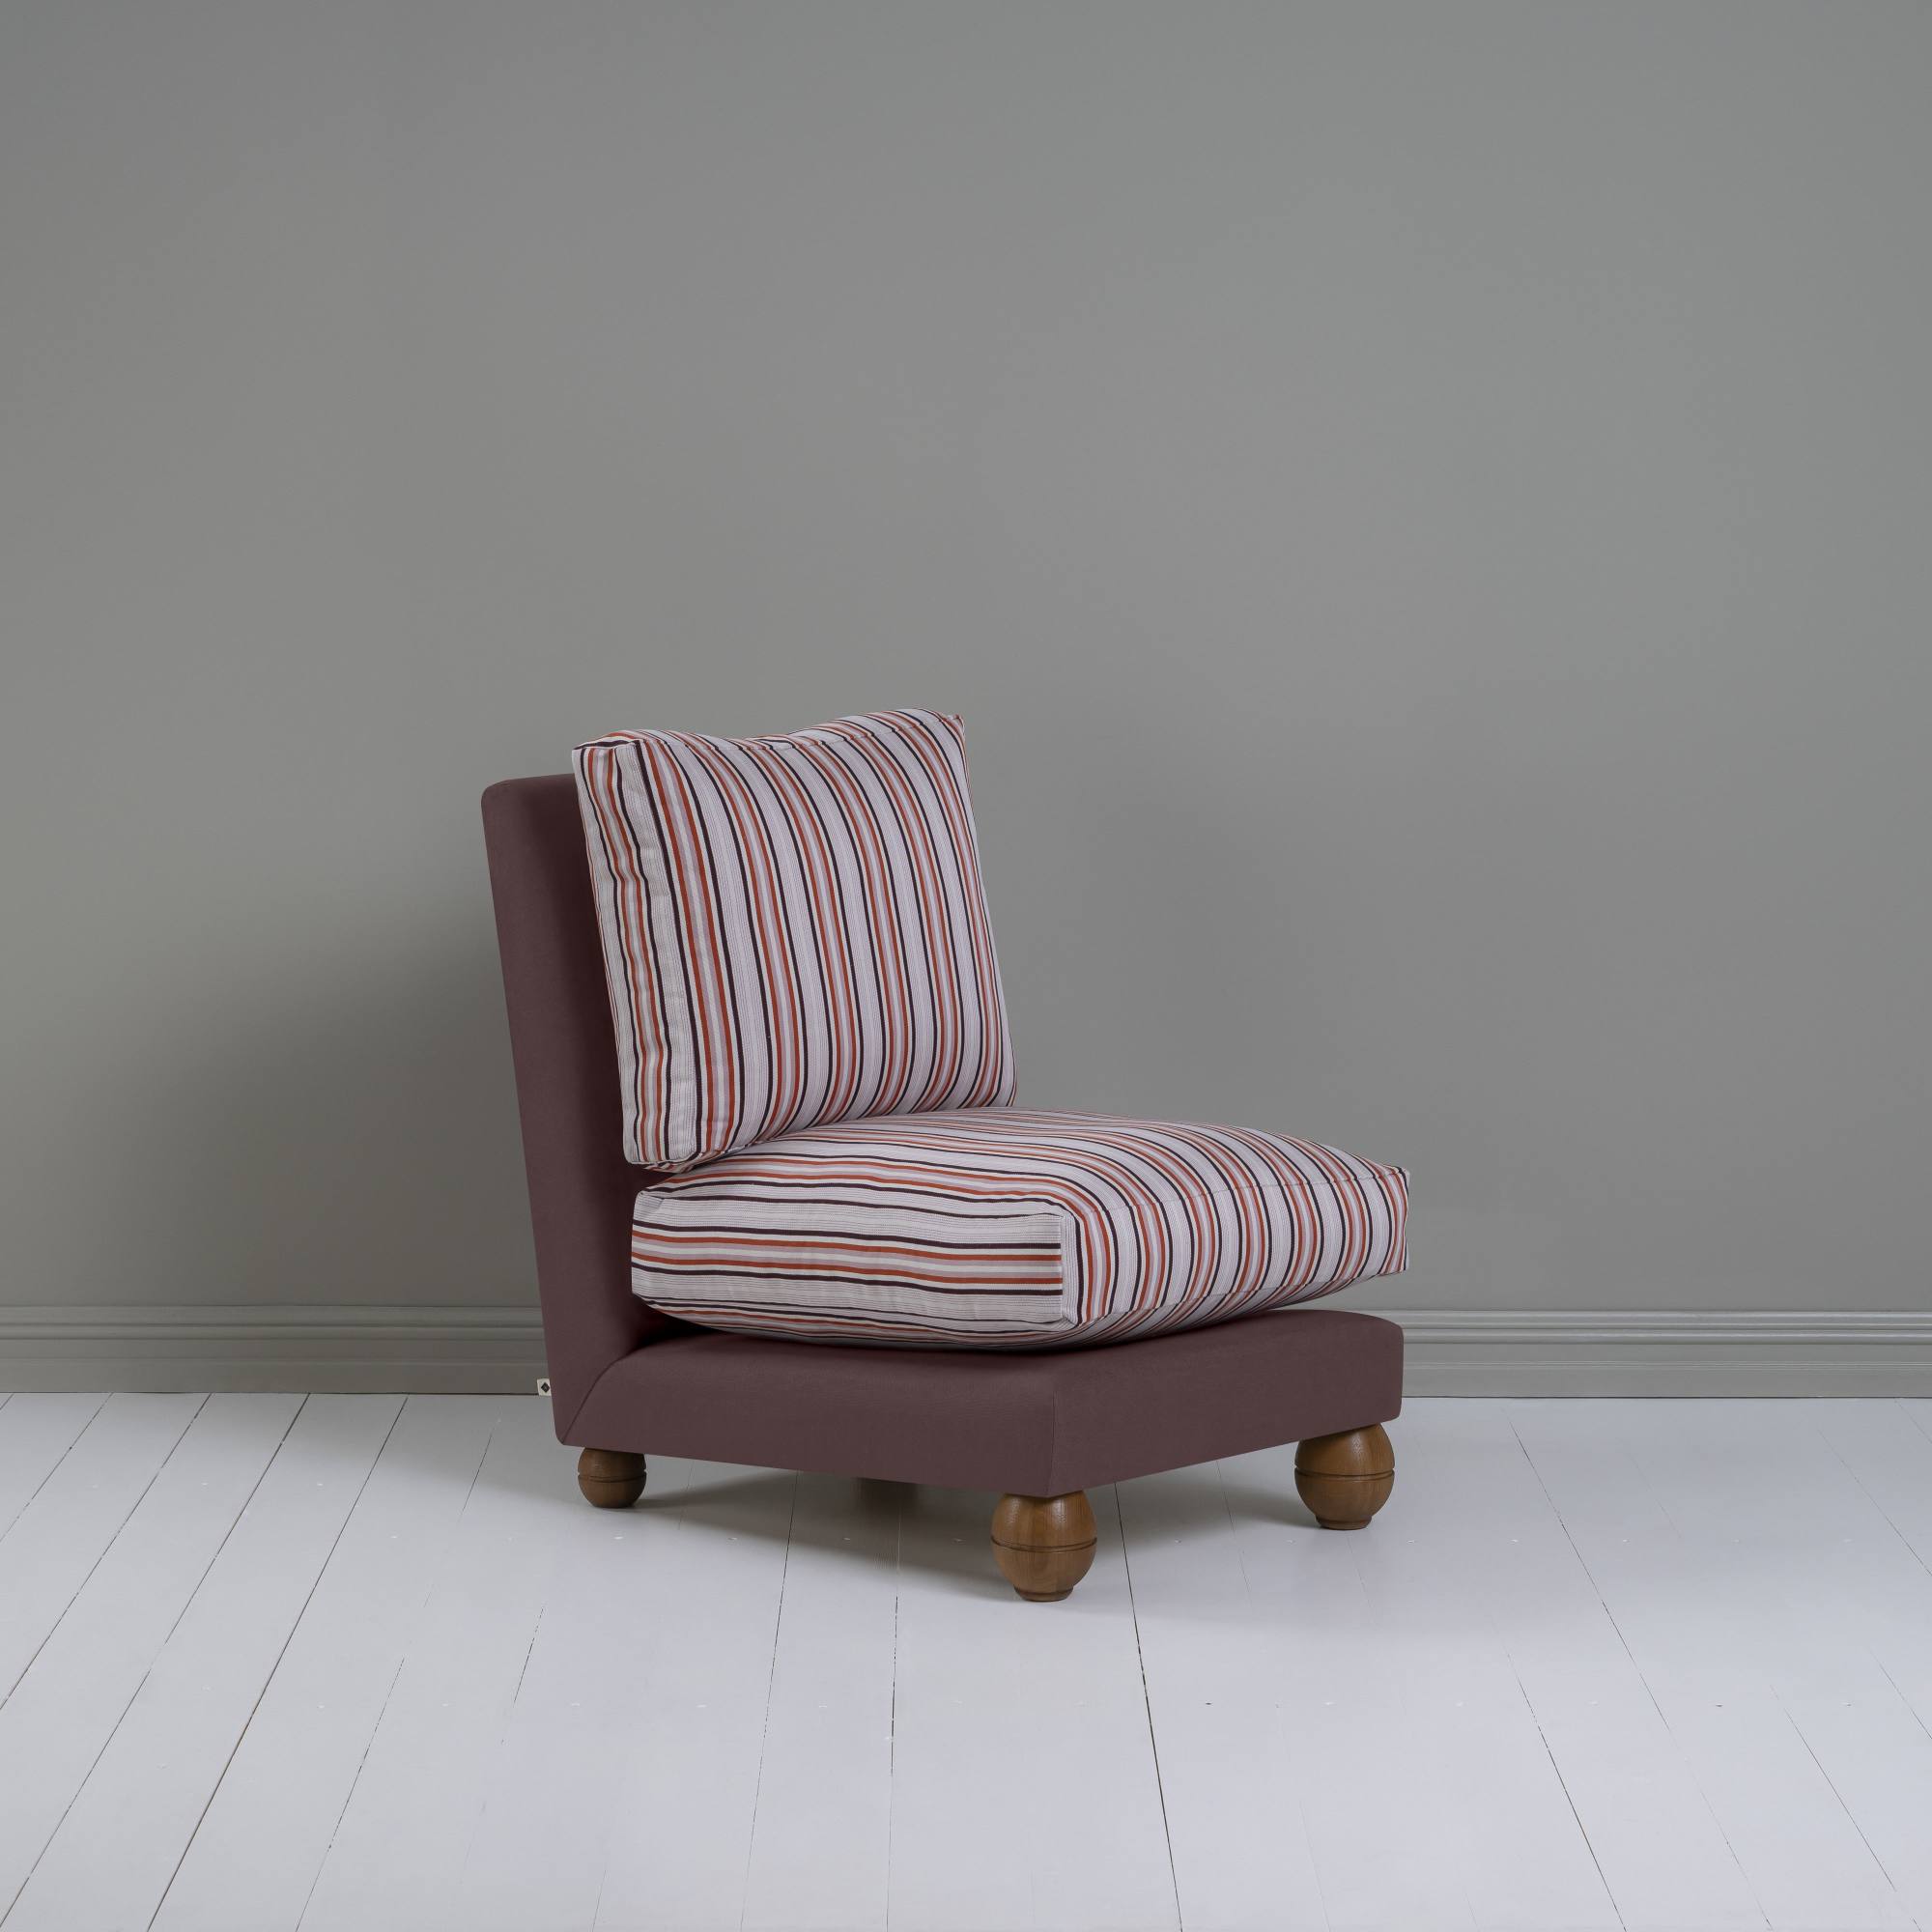  Perch Slipper Armchair in Laidback Linen Damson Frame, with Slow Lane Berry Seat 